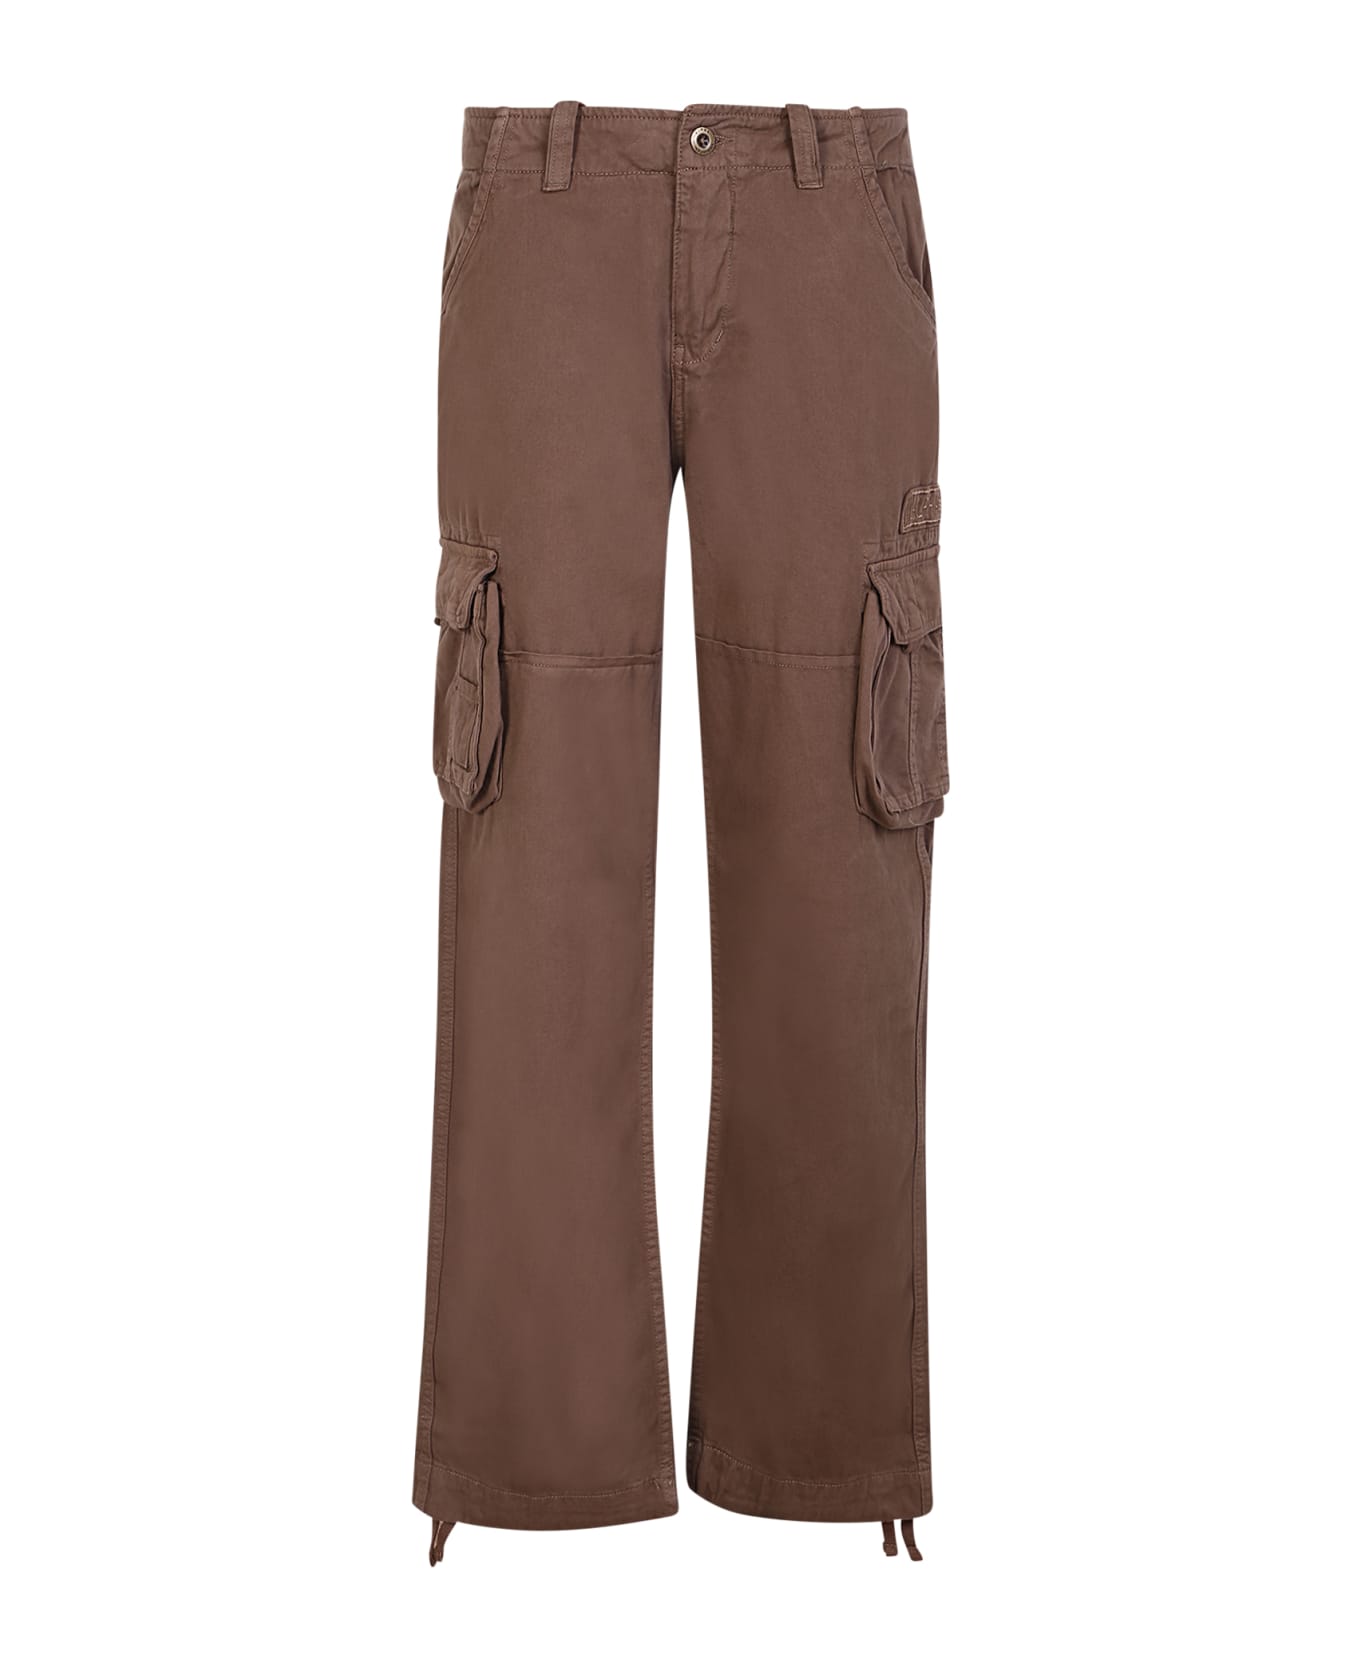 Alpha Industries Brown Cargo Trousers - Beige ボトムス